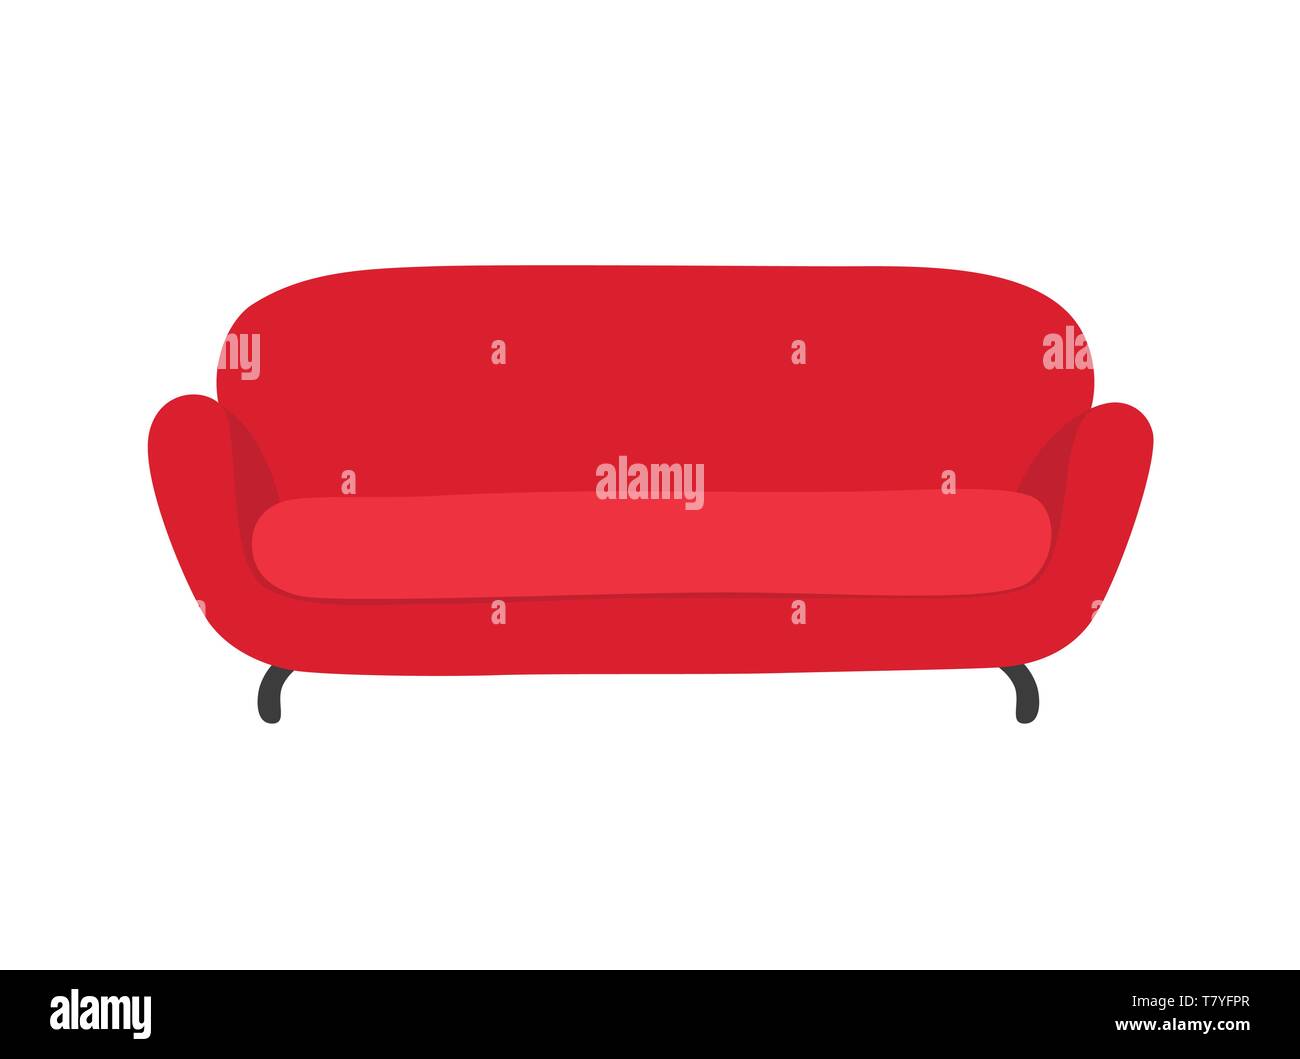 Sofa and couch red colorful cartoon illustration vector. Comfortable lounge for interior design isolated on white background. Stock Vector